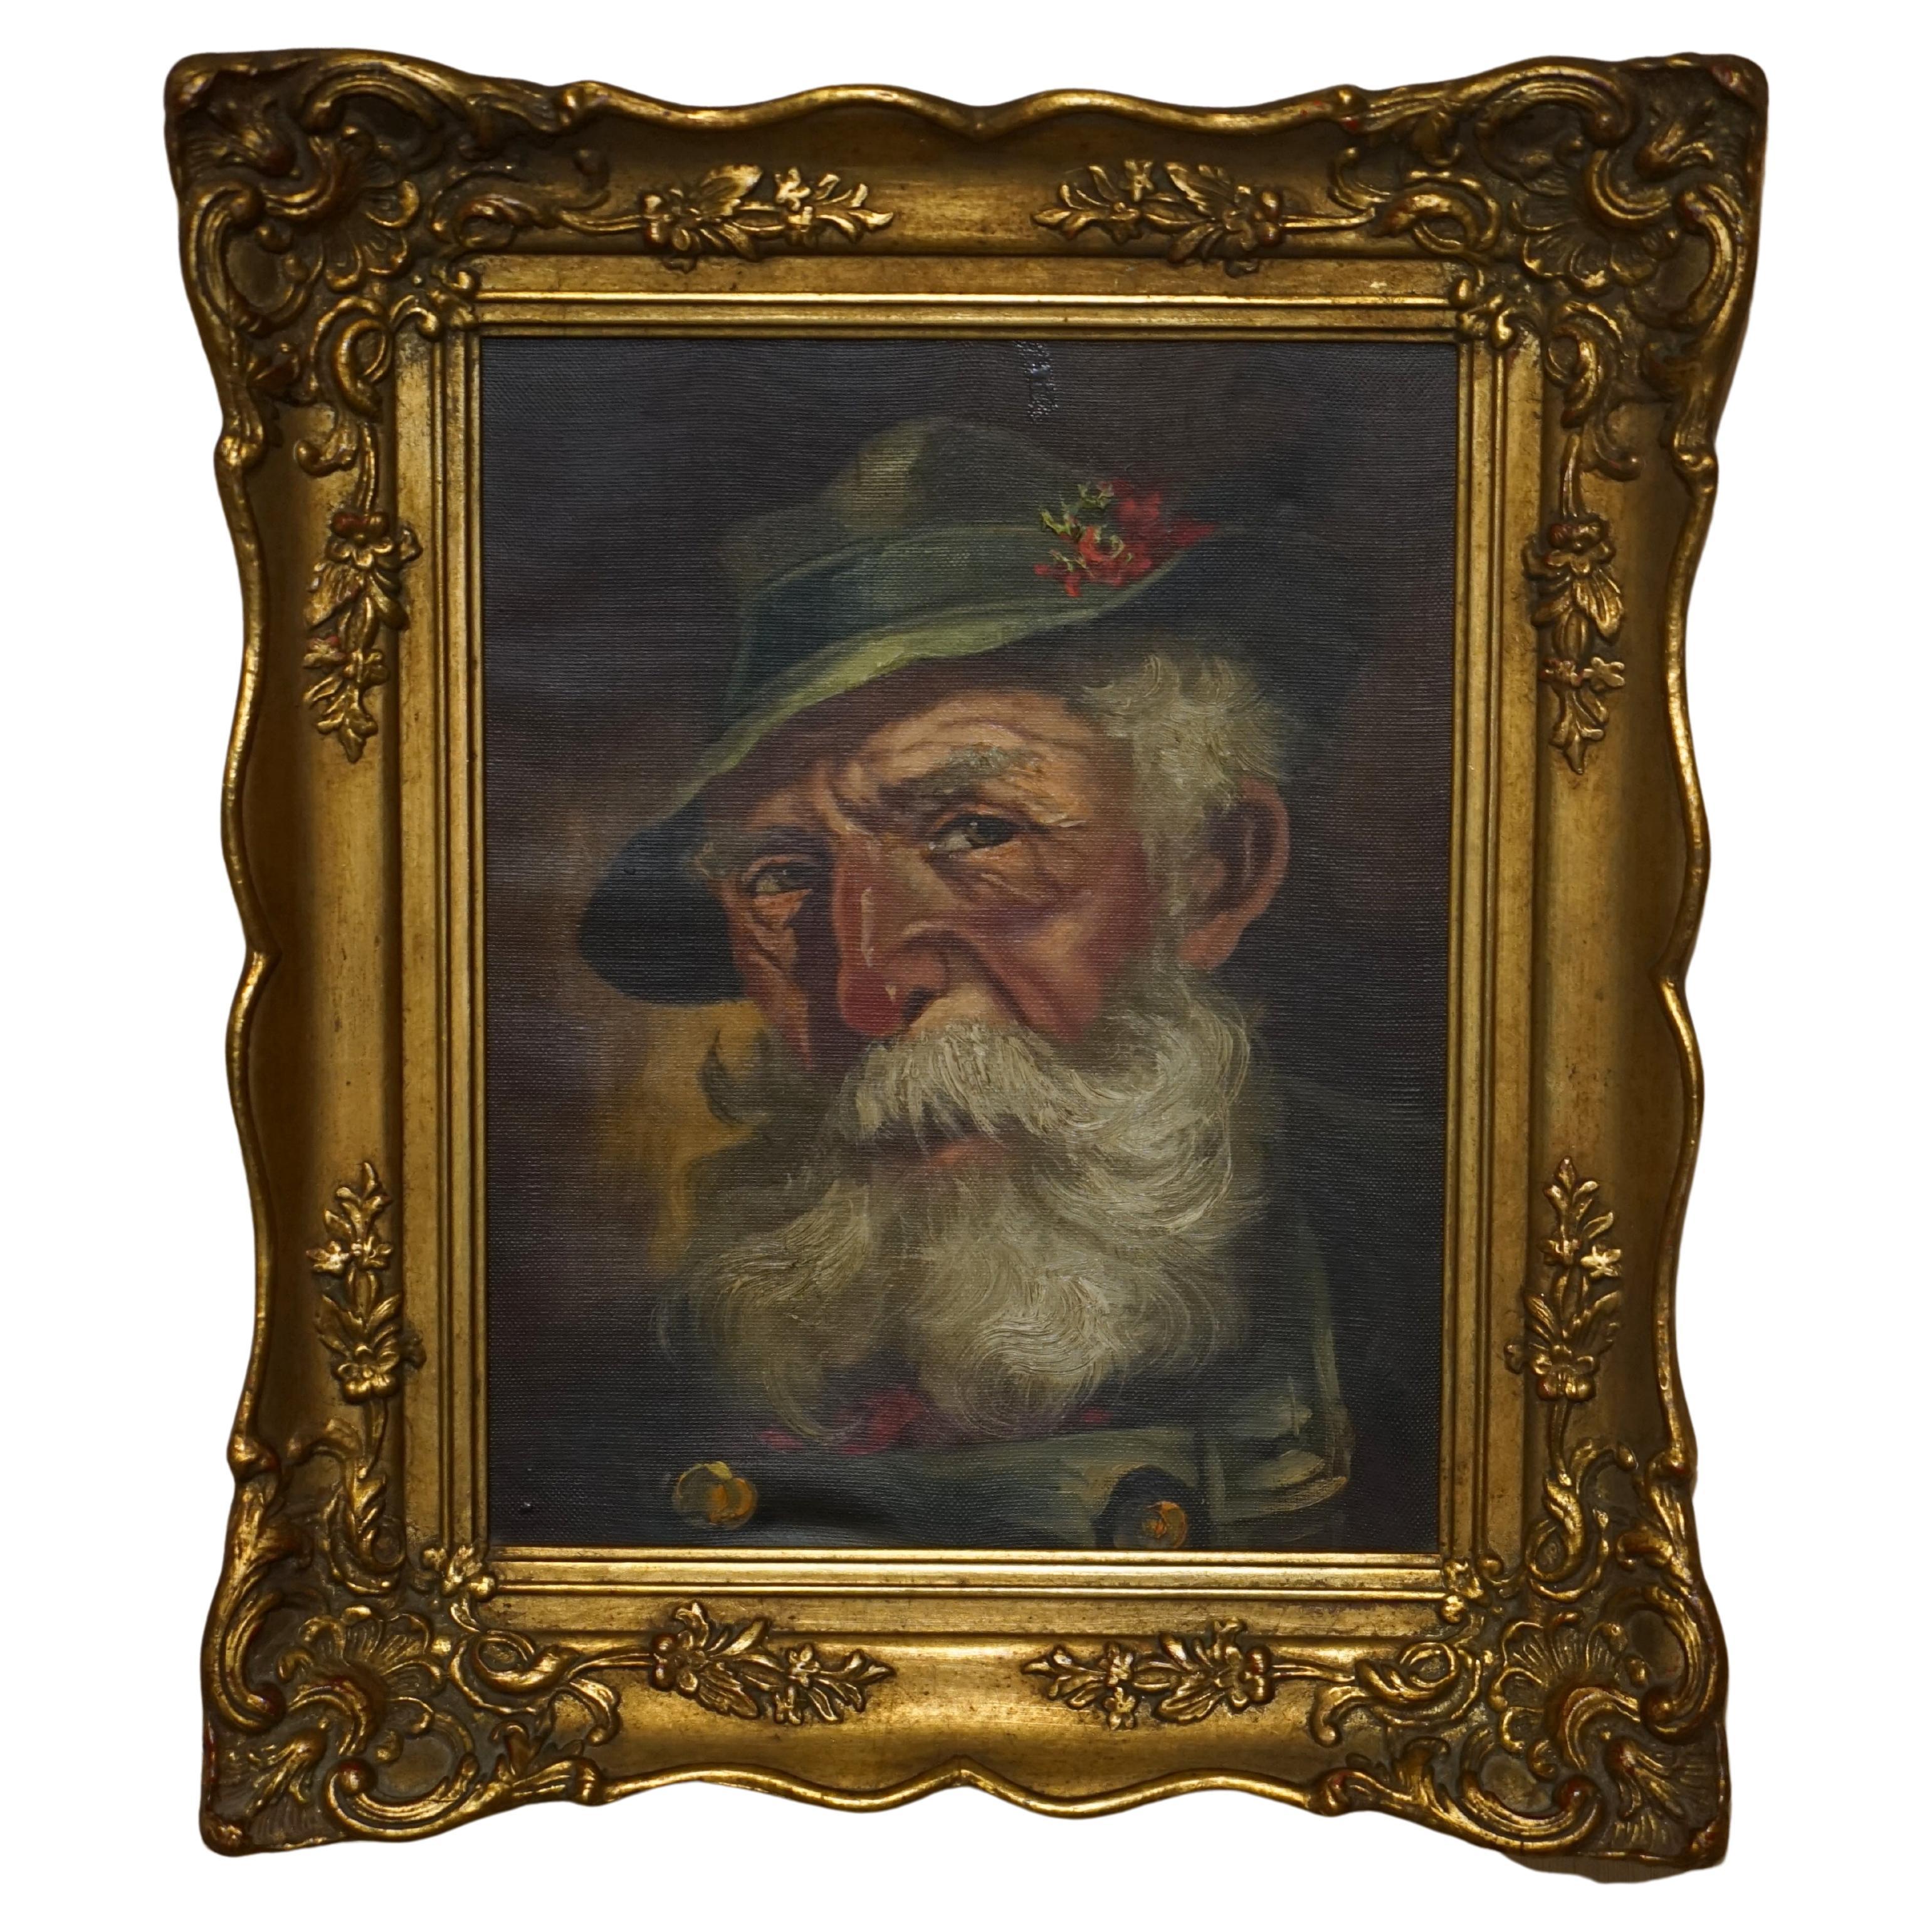 ANTIQUE SIGNED DUTCH OIL ON CANvas PAiNTING OF OLD MAN WITH GREY HAIR & CAP